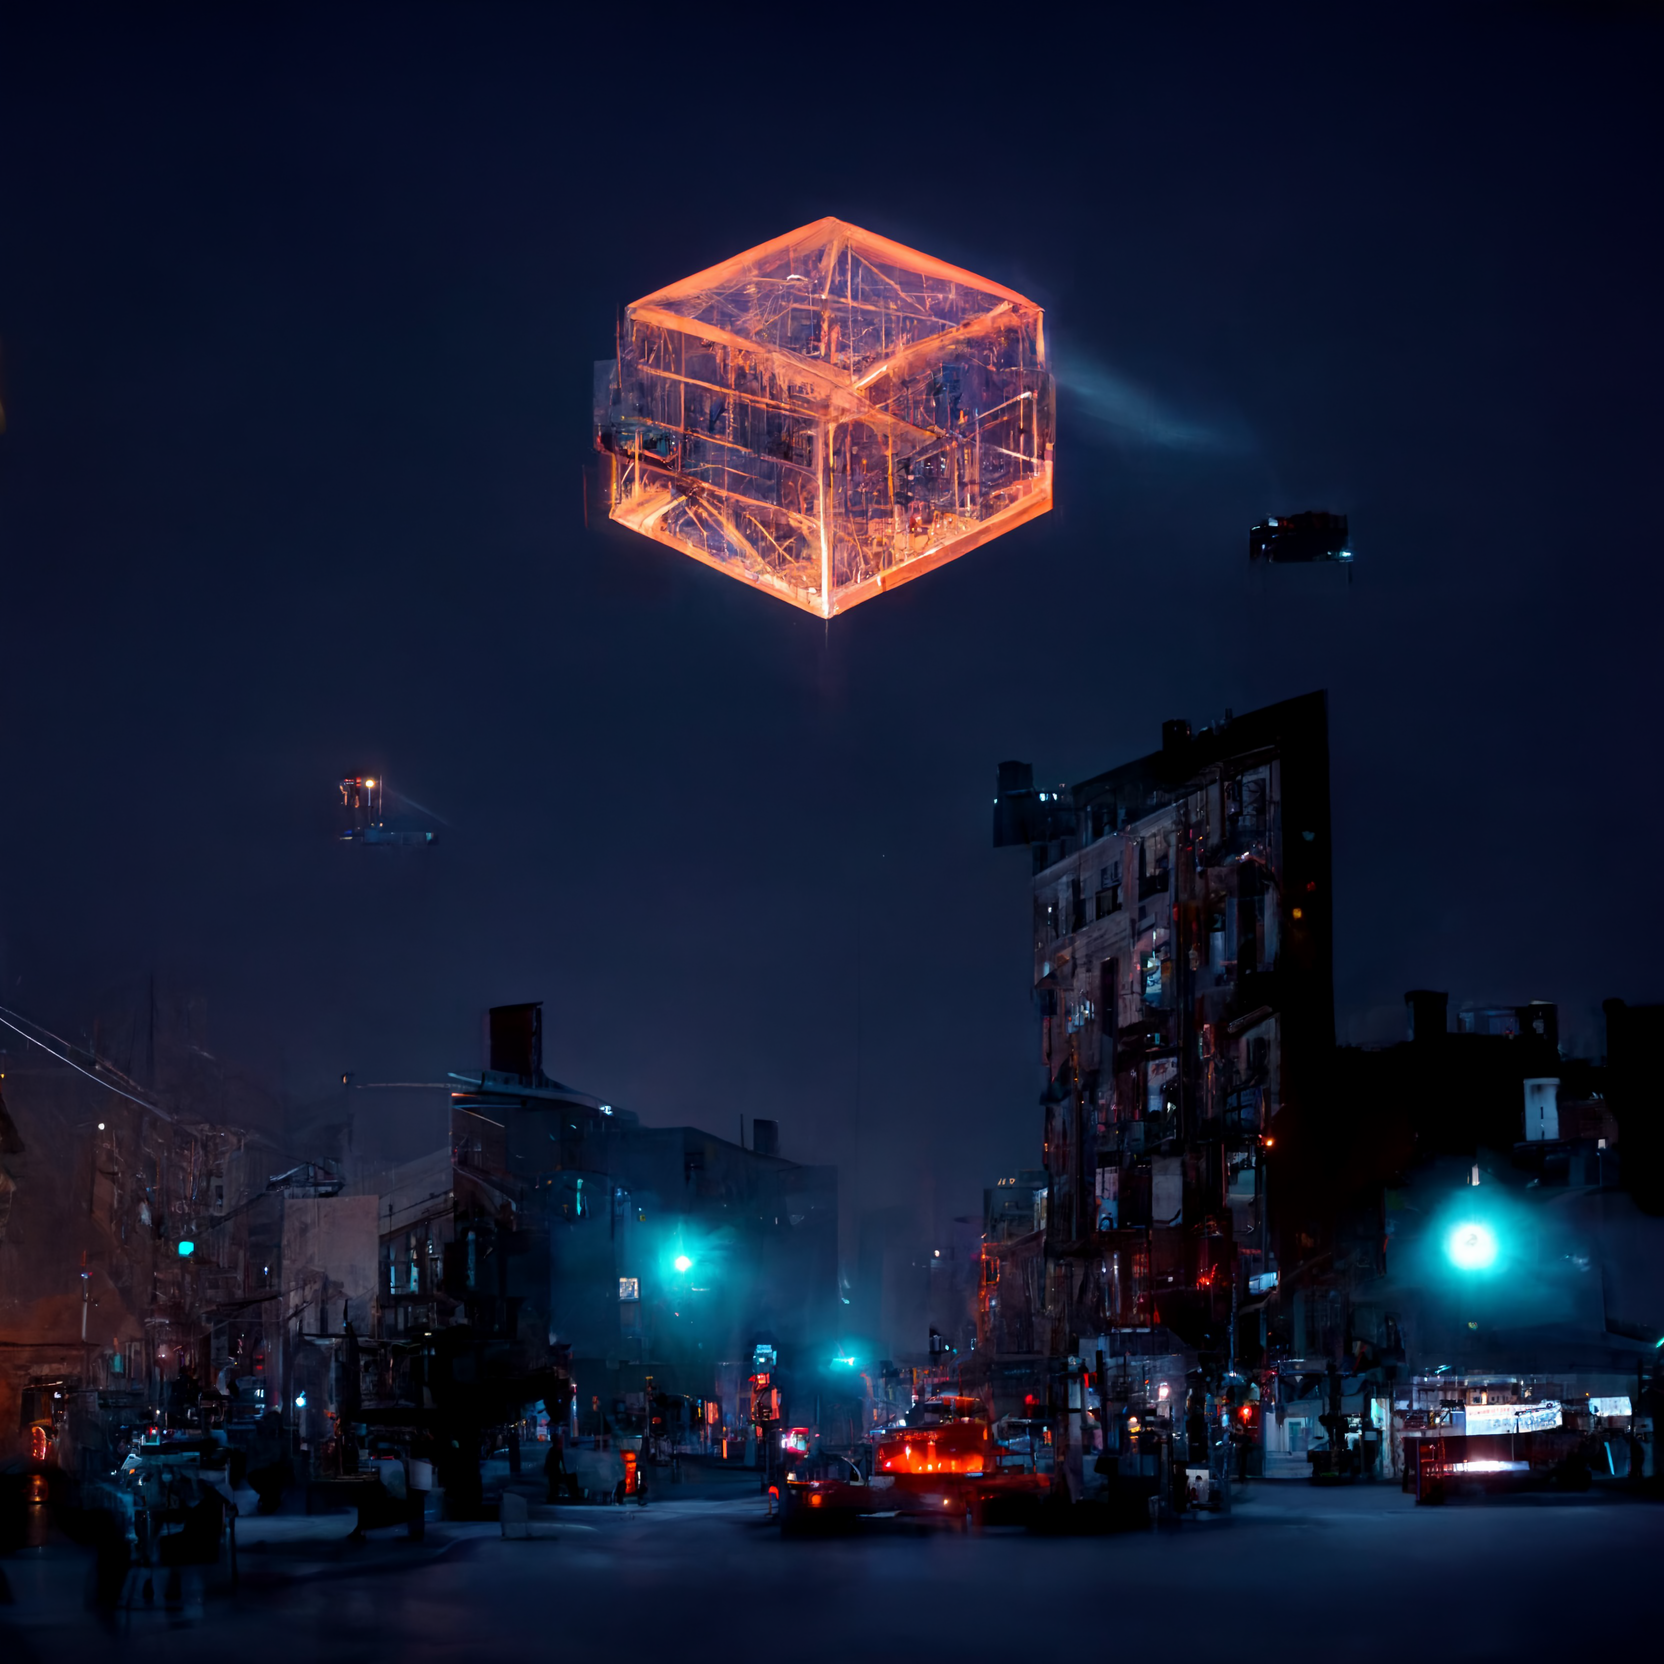 696b59d9-1592-44b4-85a9-bbc77bb56ae0_EllieMakes_wireframe_of_a_giant_glowing_squished_cube_hovering_above_a_Brooklyn_street_at_midnight_by_Edward_ho.png